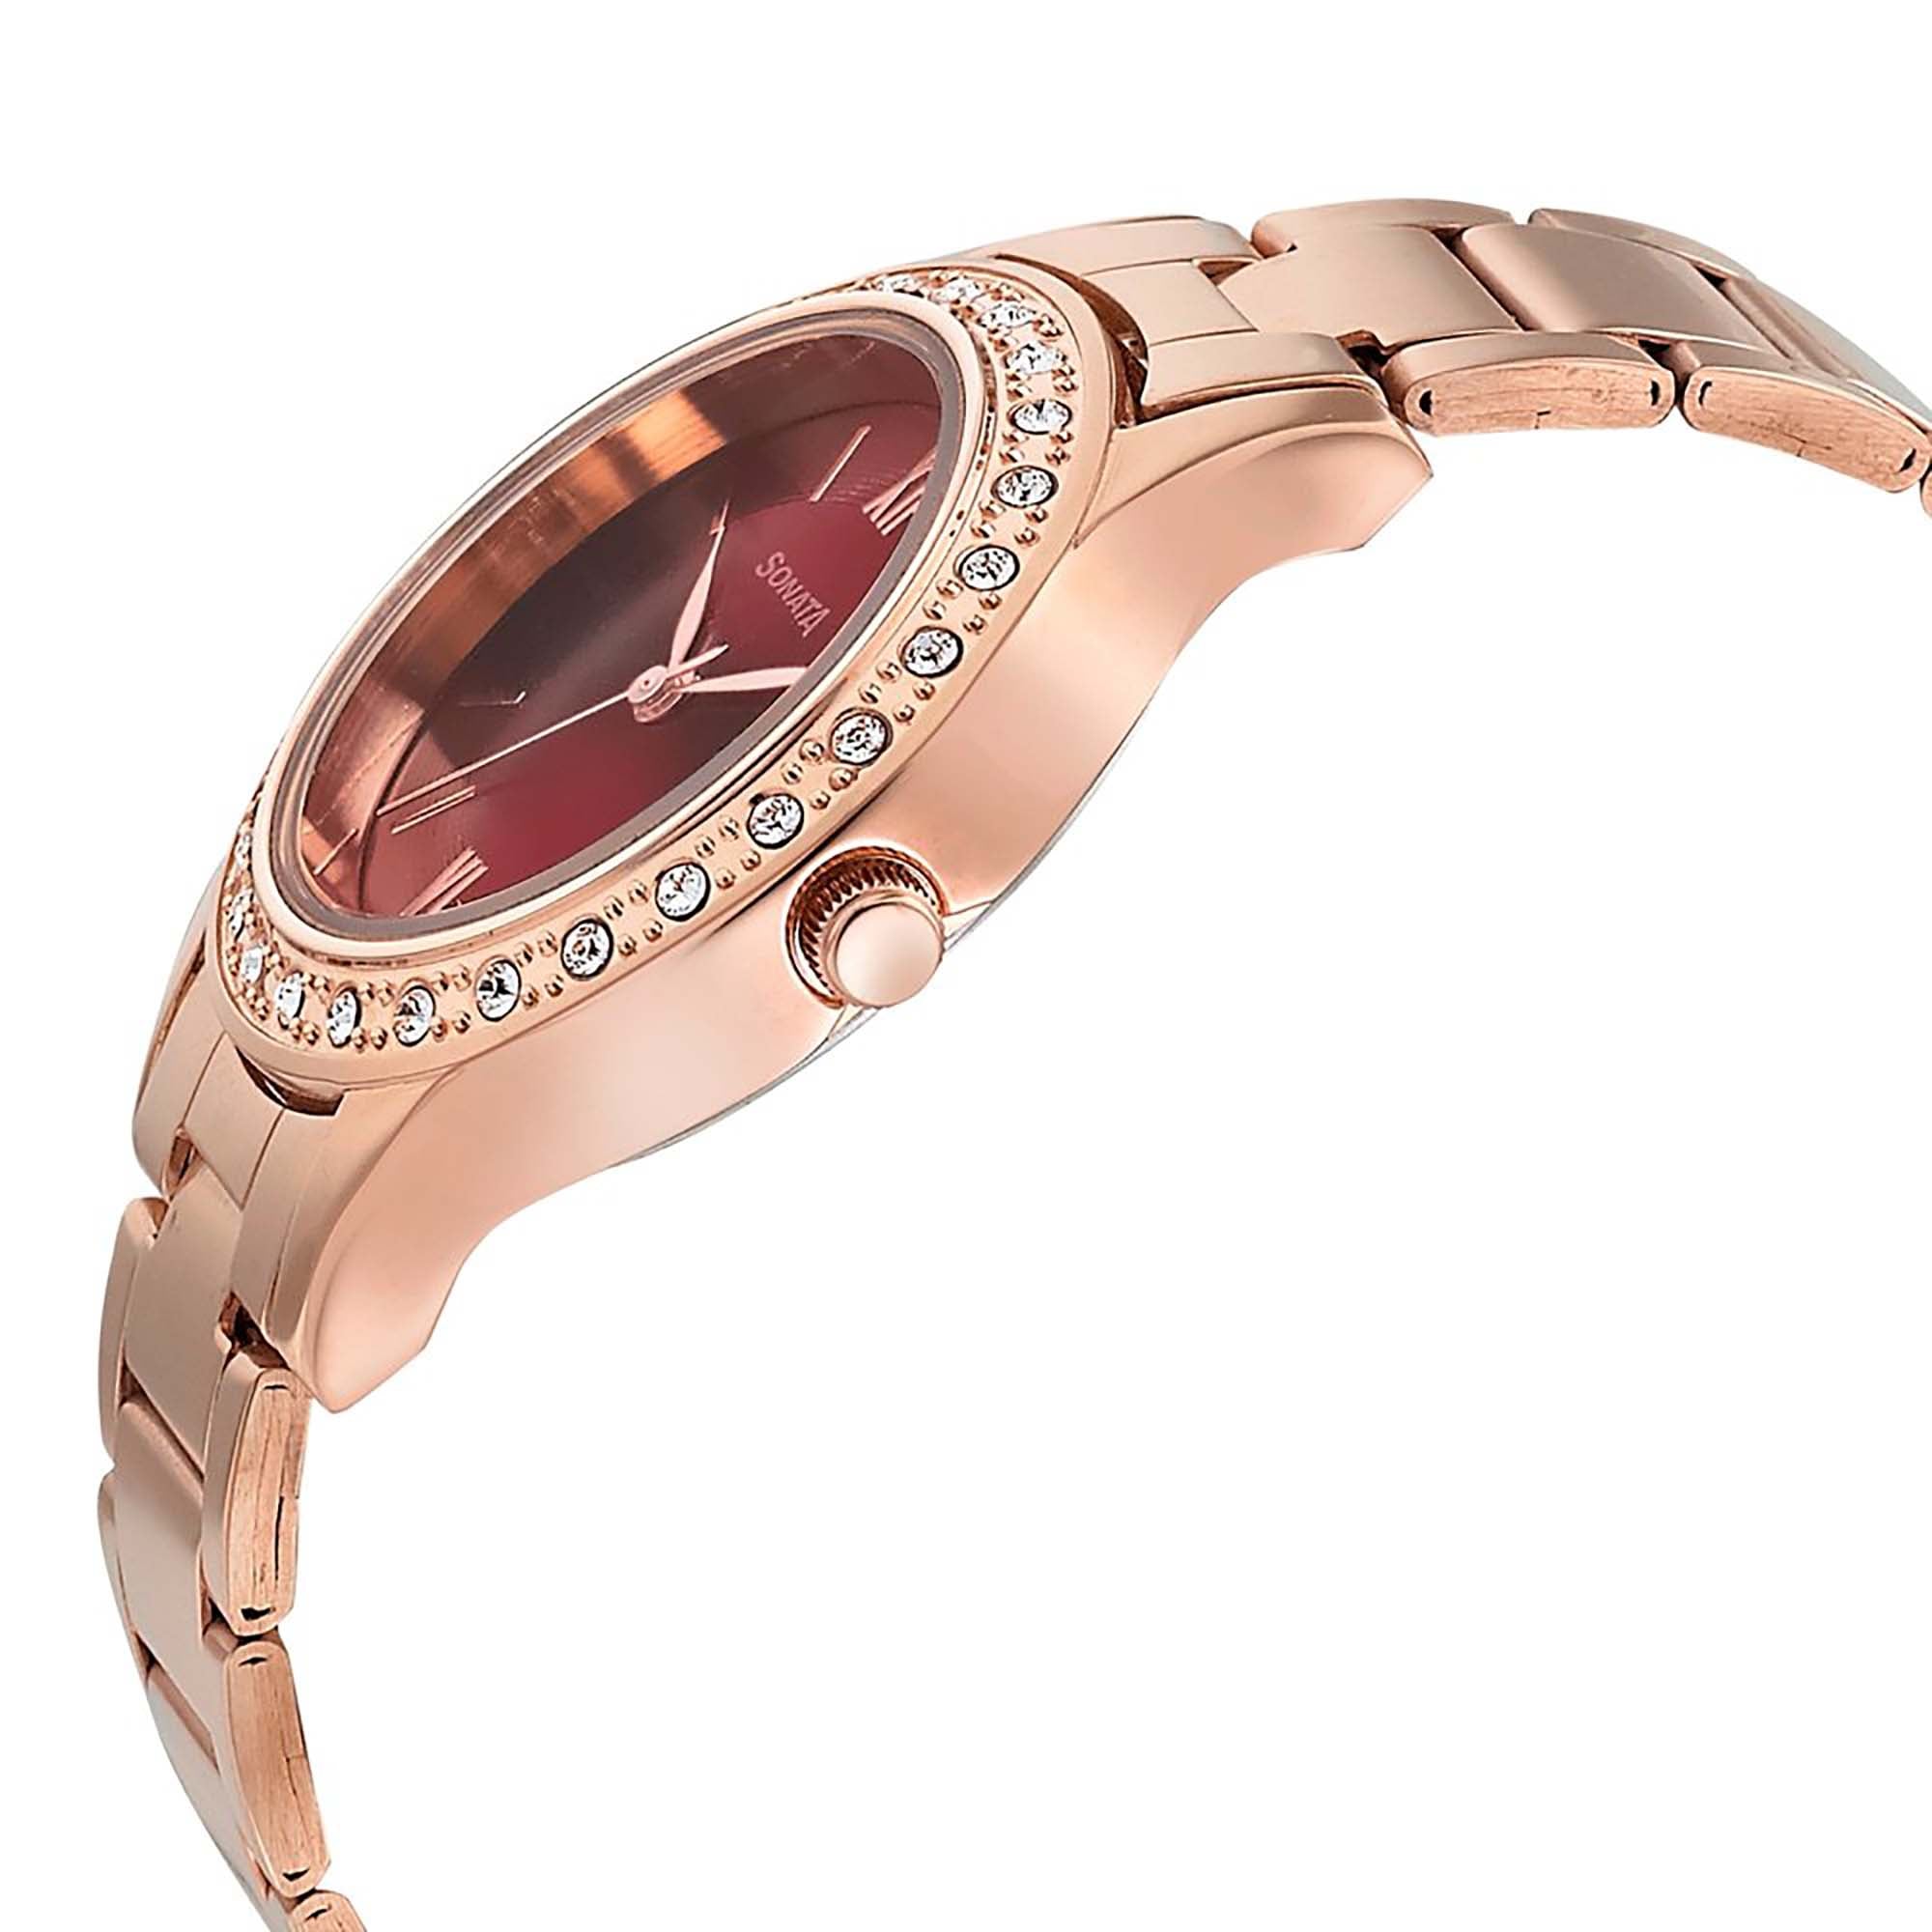 Sonata Blush It Up Maroon Dial Women Watch With Stainless Steel Strap